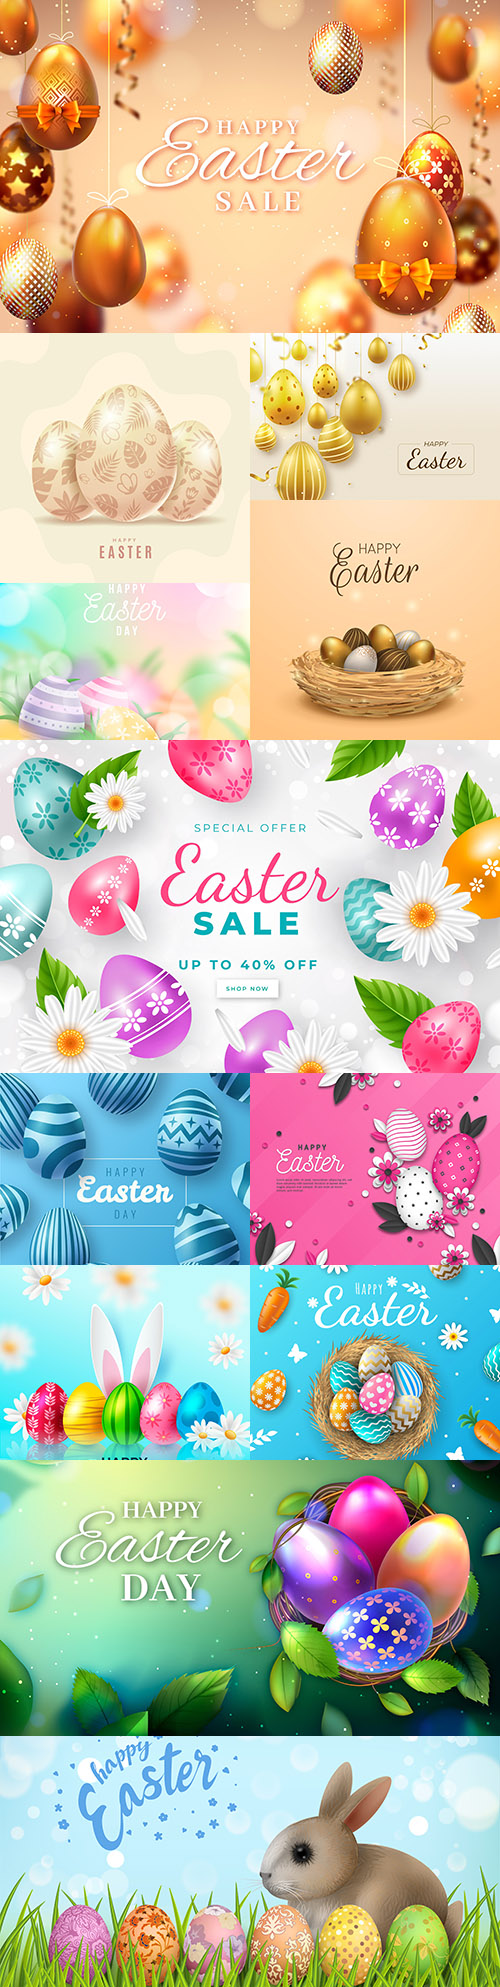 Happy Easter collection of realistic illustrations with eggs 2
